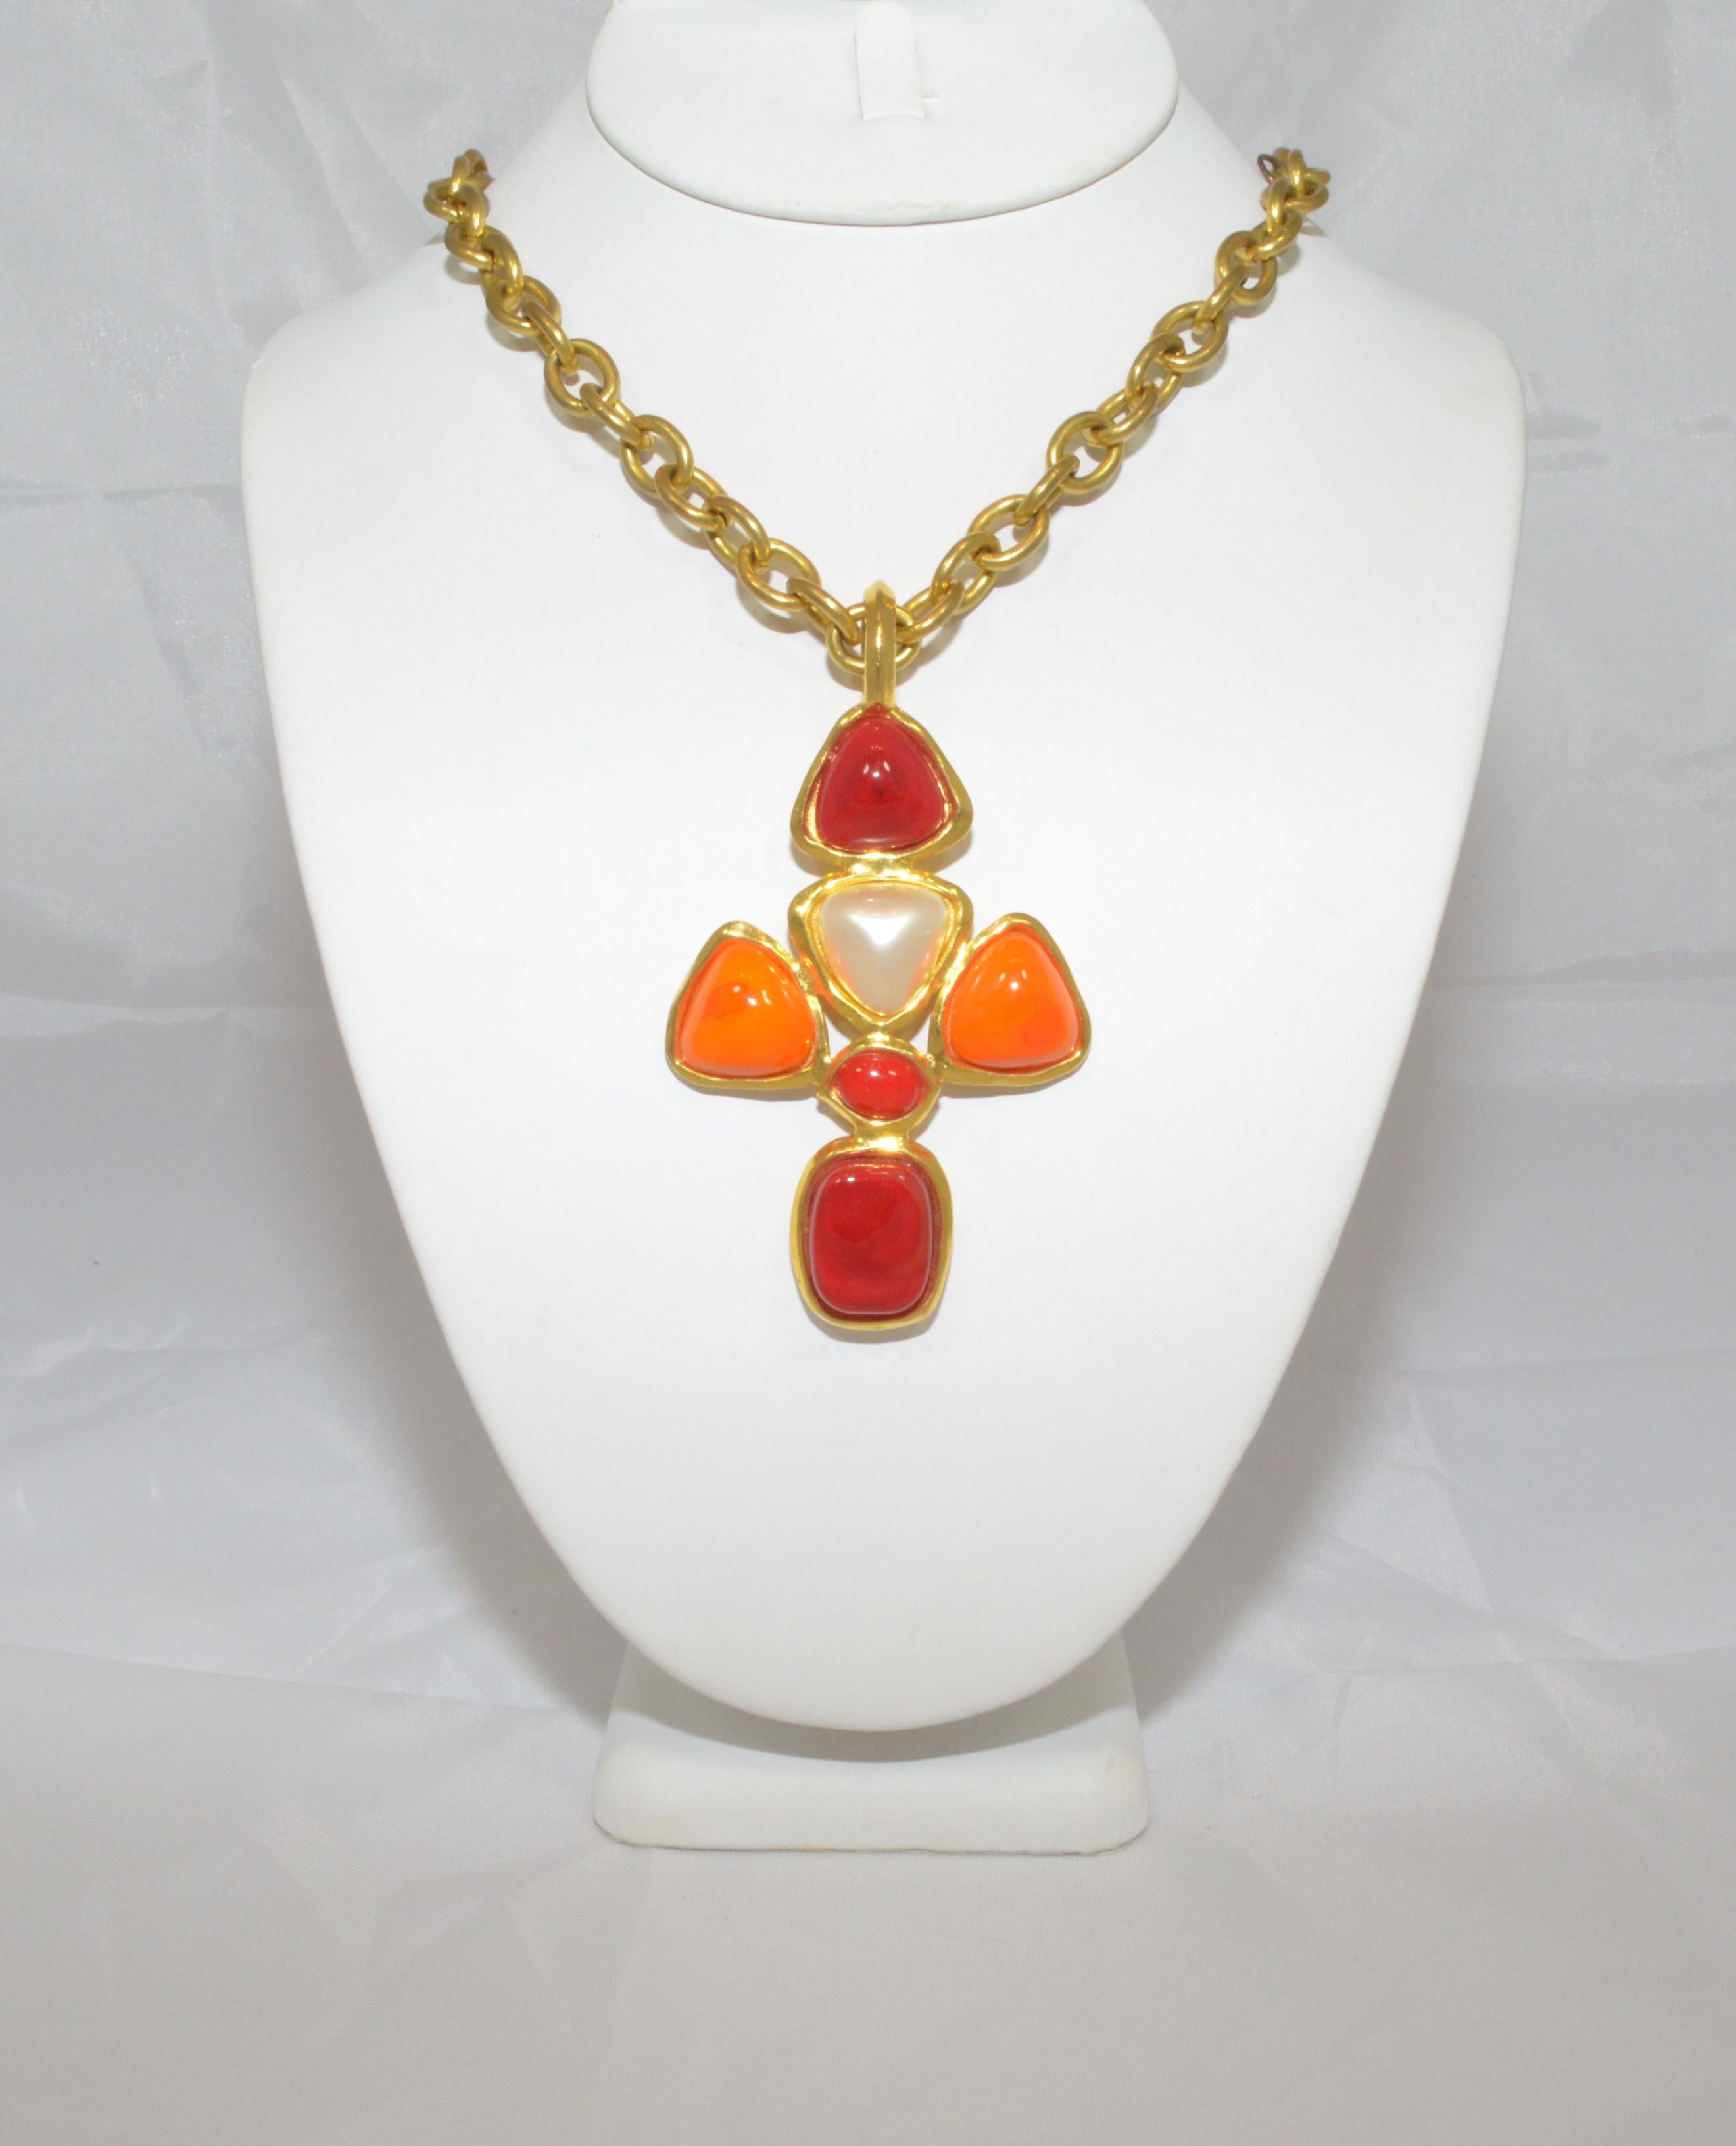 Vintage Chanel necklace from the 1993 P collection on a gold-tone chain with a red, orange, and white gripoix pendant. Excellent vintage condition.

Measurements:
Length - 28''
Drop - 14''
Length of pendant - 3.5''